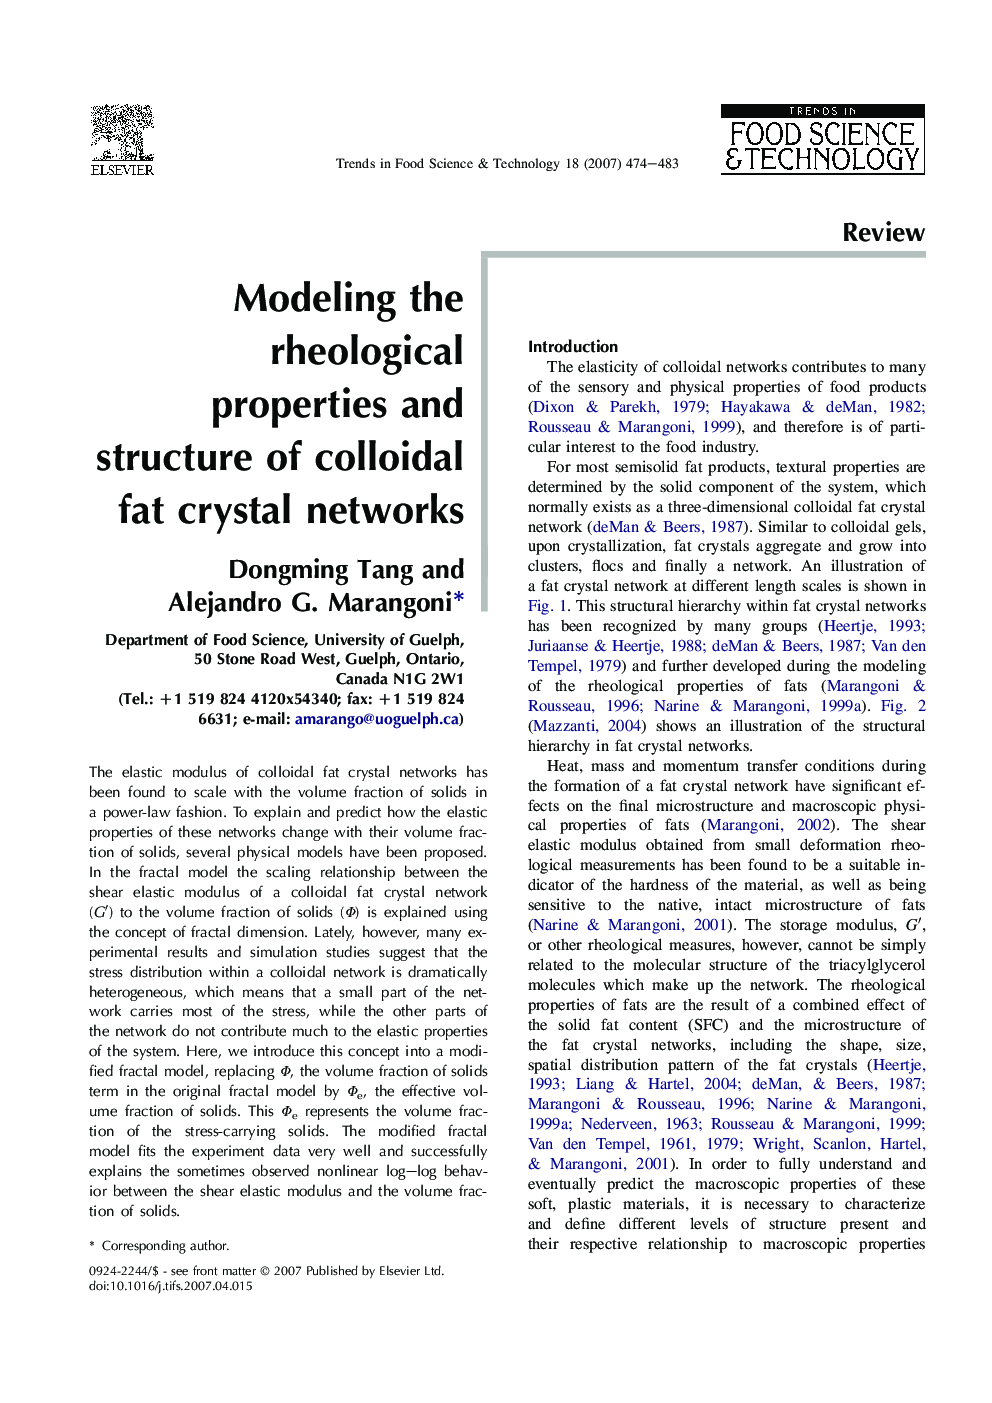 Modeling the rheological properties and structure of colloidal fat crystal networks